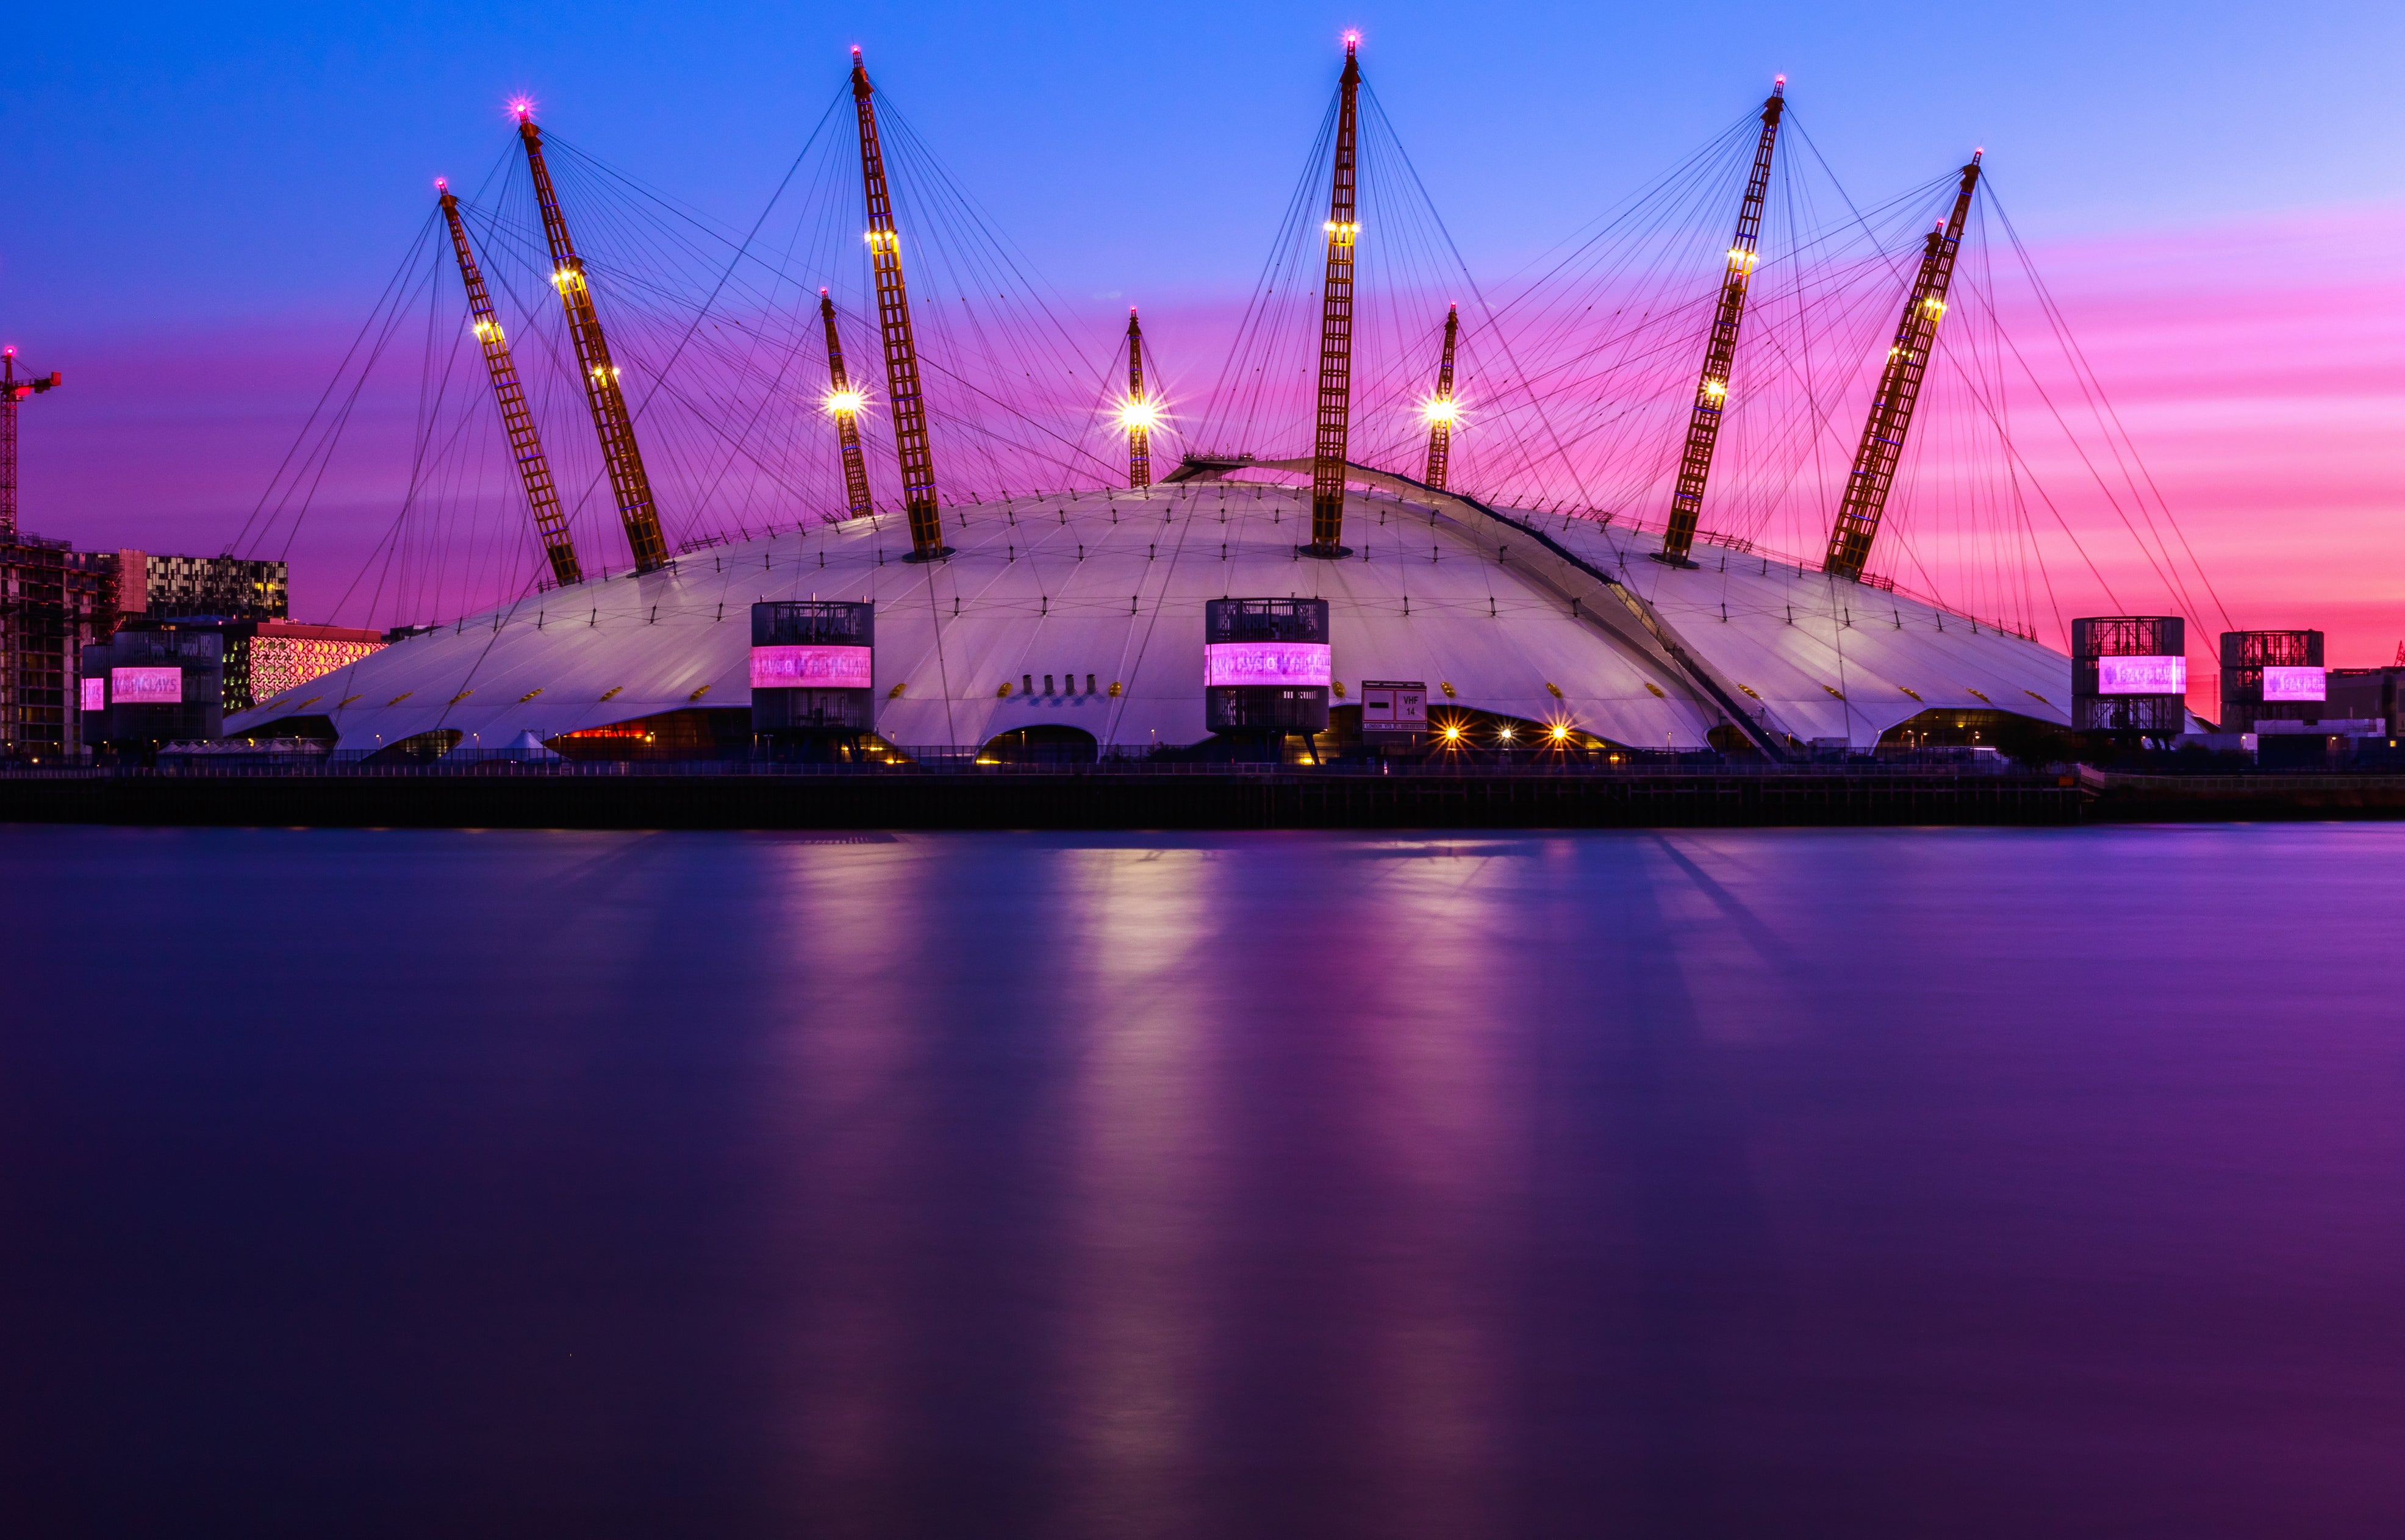 The O2 has capacity for 10,000 pairs of devoted fathers and daughters, or 20,000 solo embarrassing dads